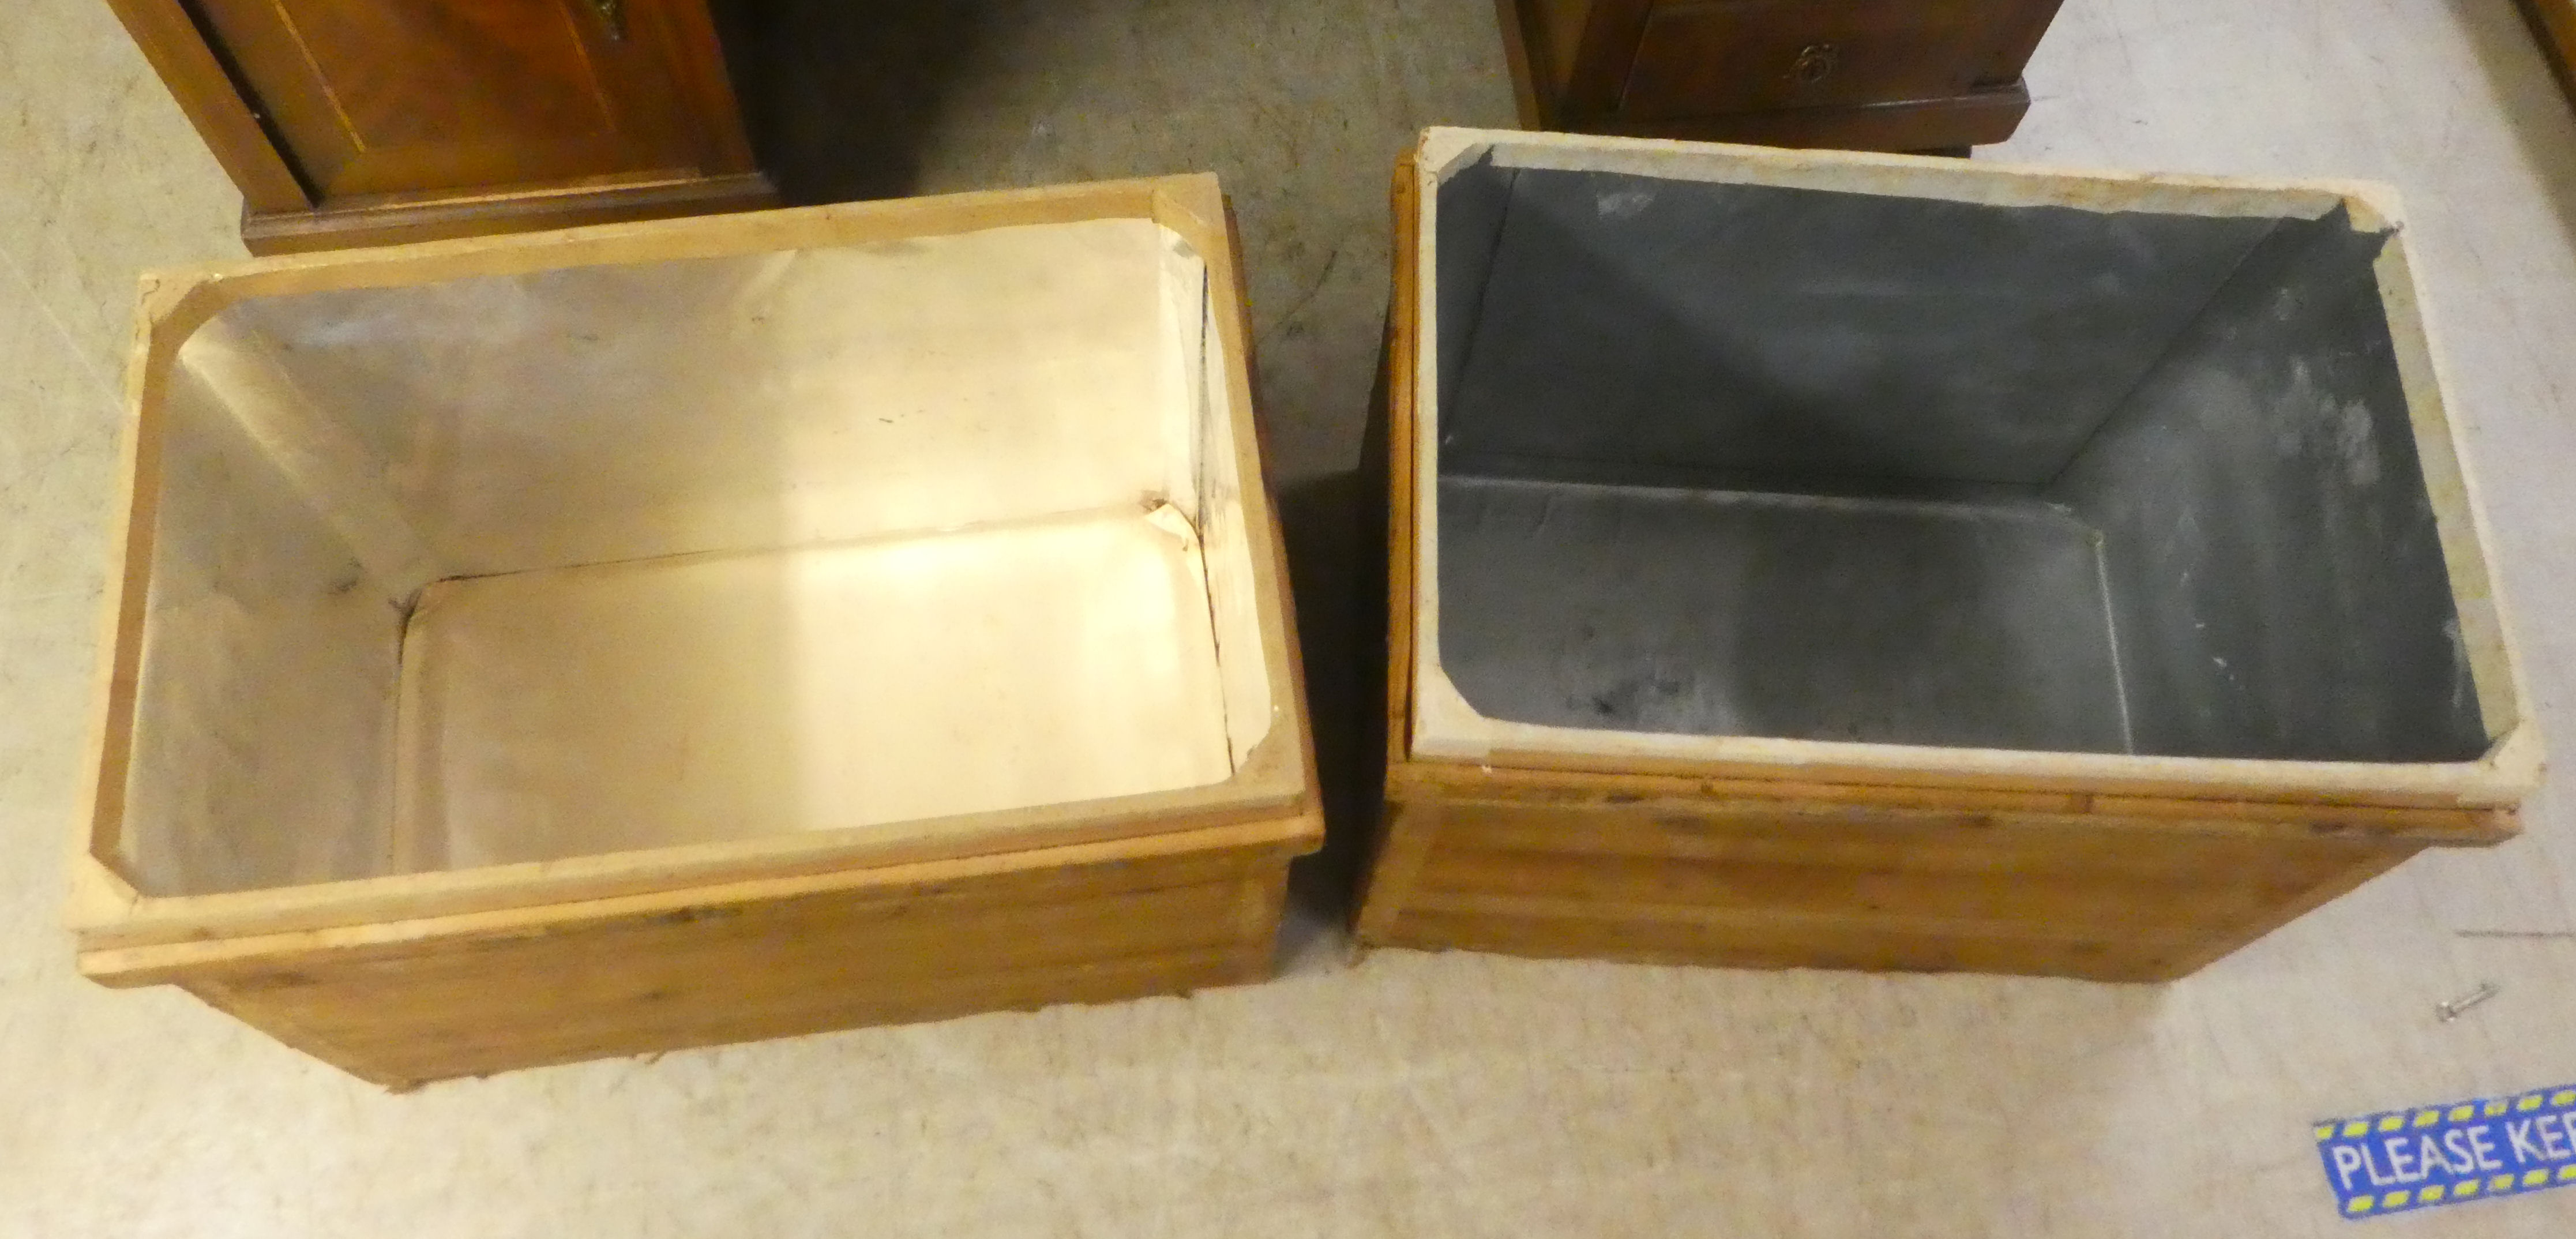 Two similar Japanese pine tea boxes with printed paper sides  19"h  26"w - Image 7 of 7